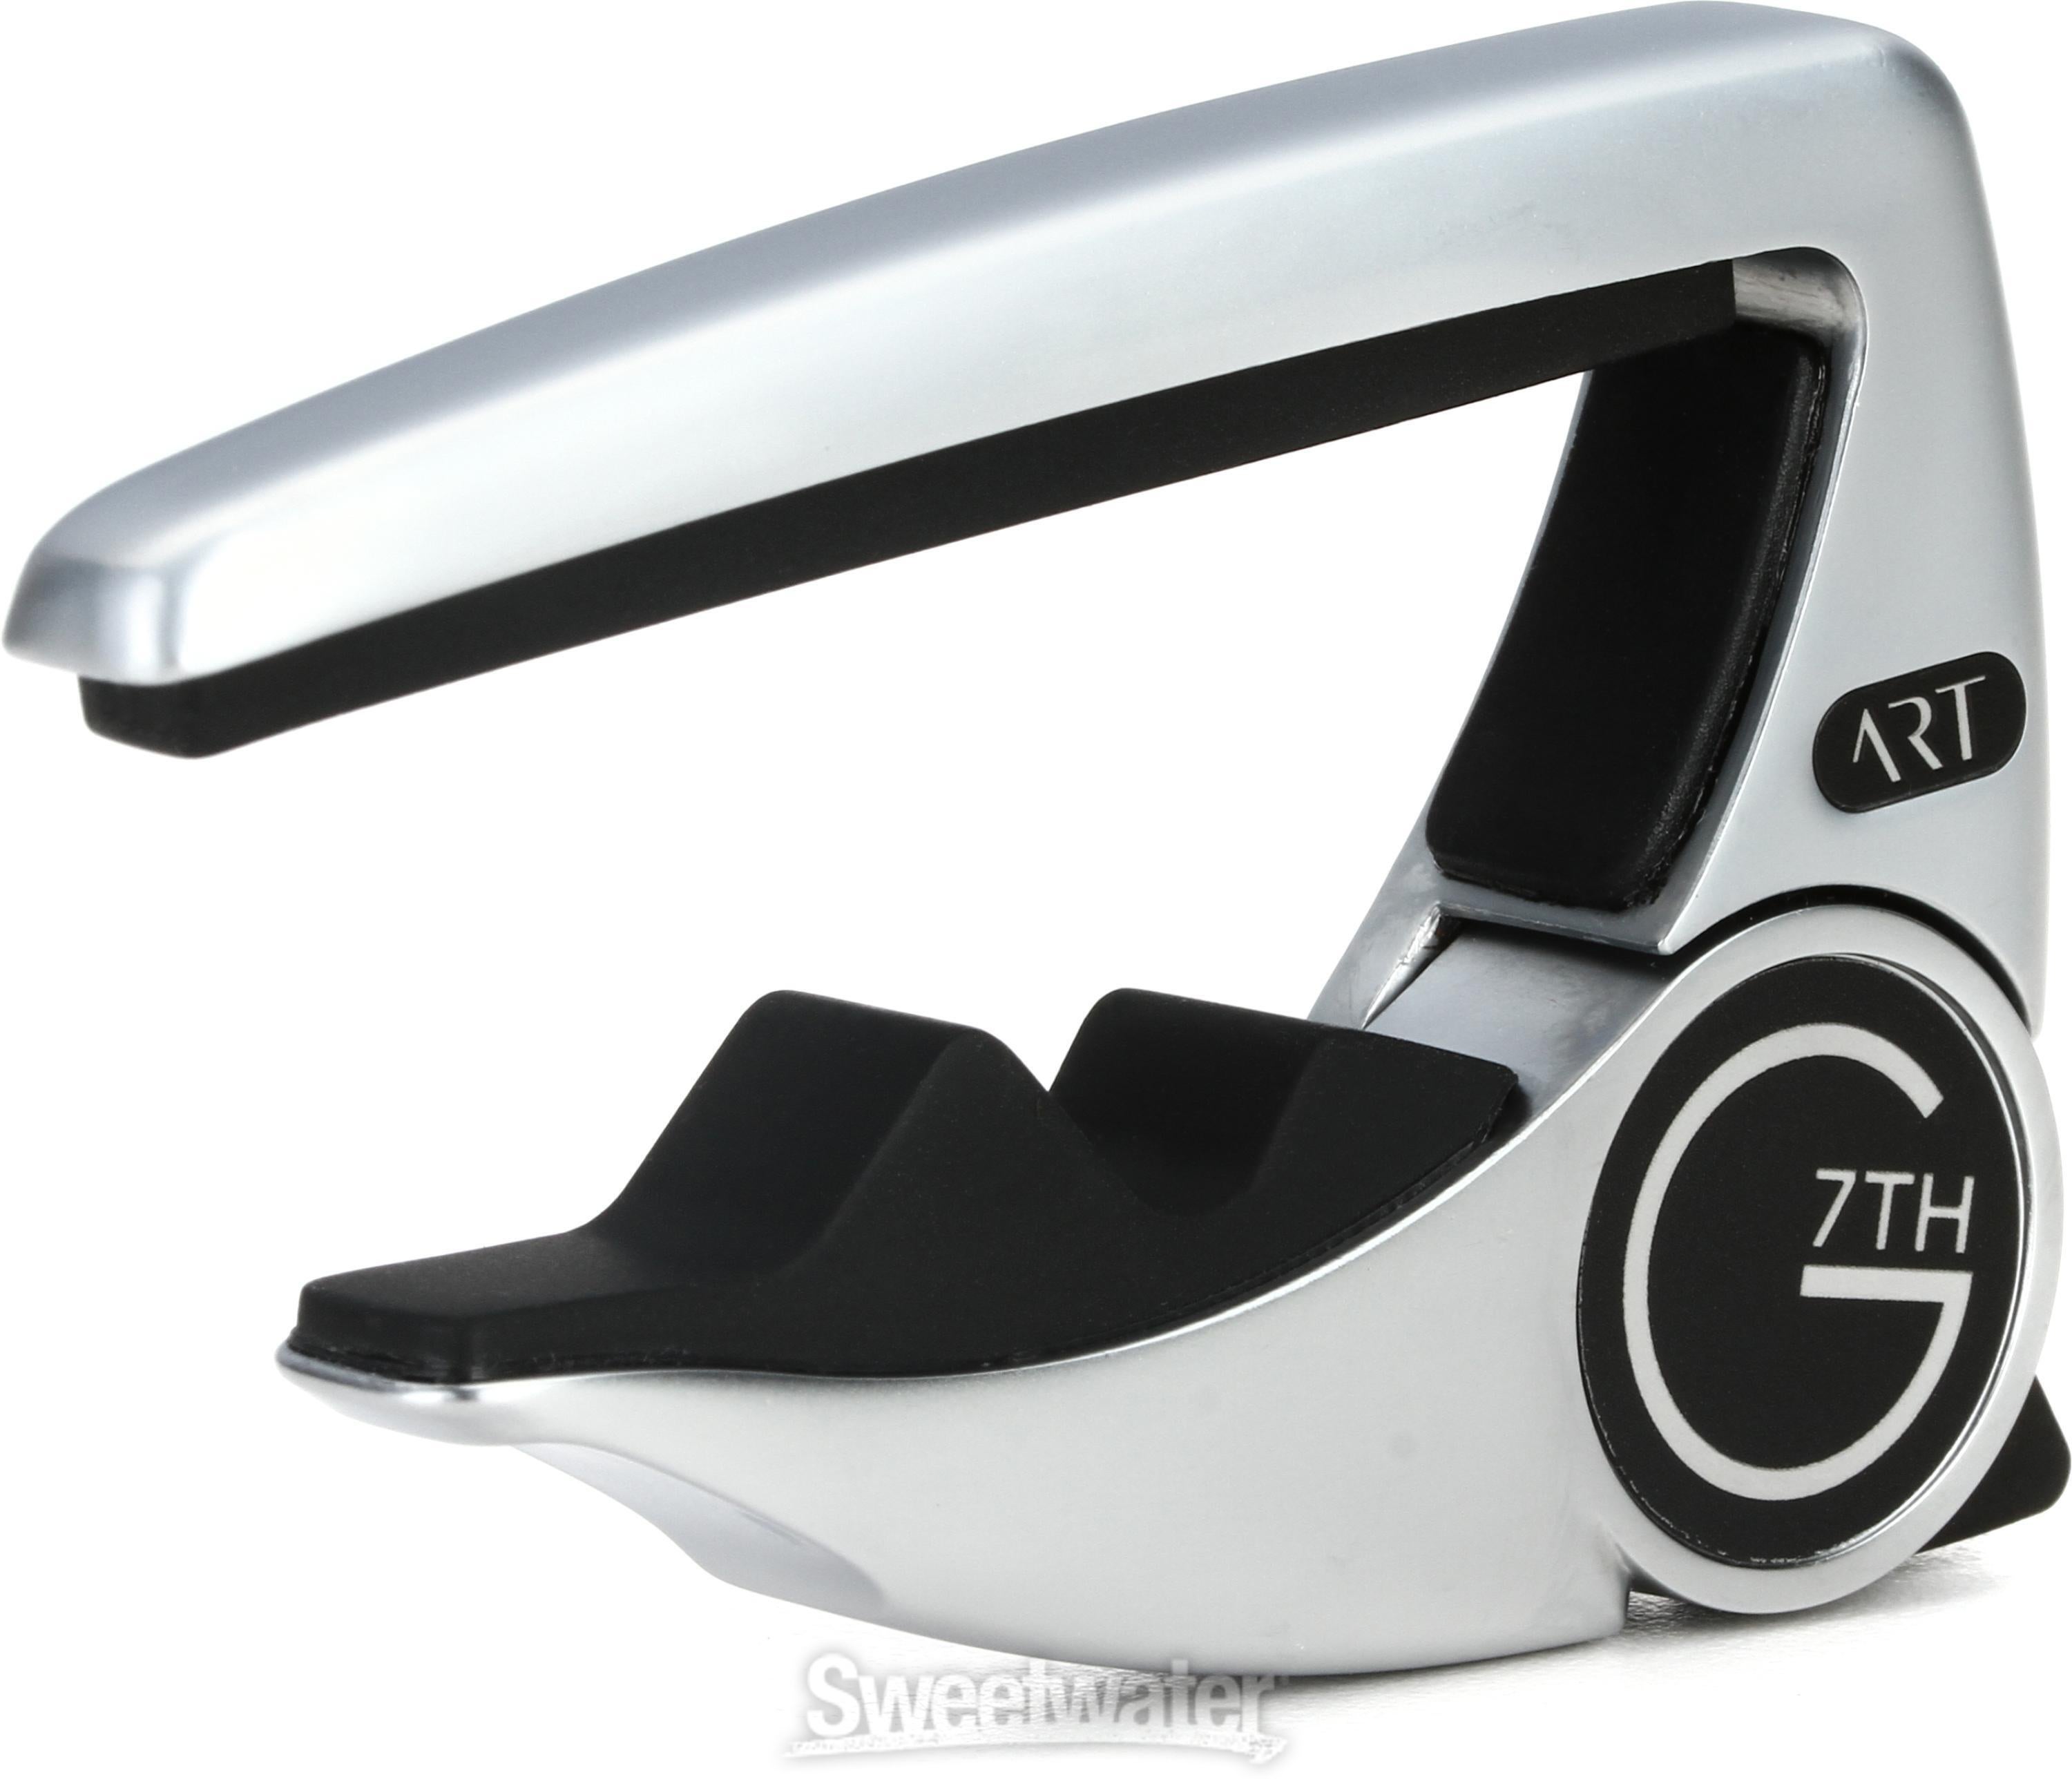 G7th Performance 3 Steel String Capo - Silver